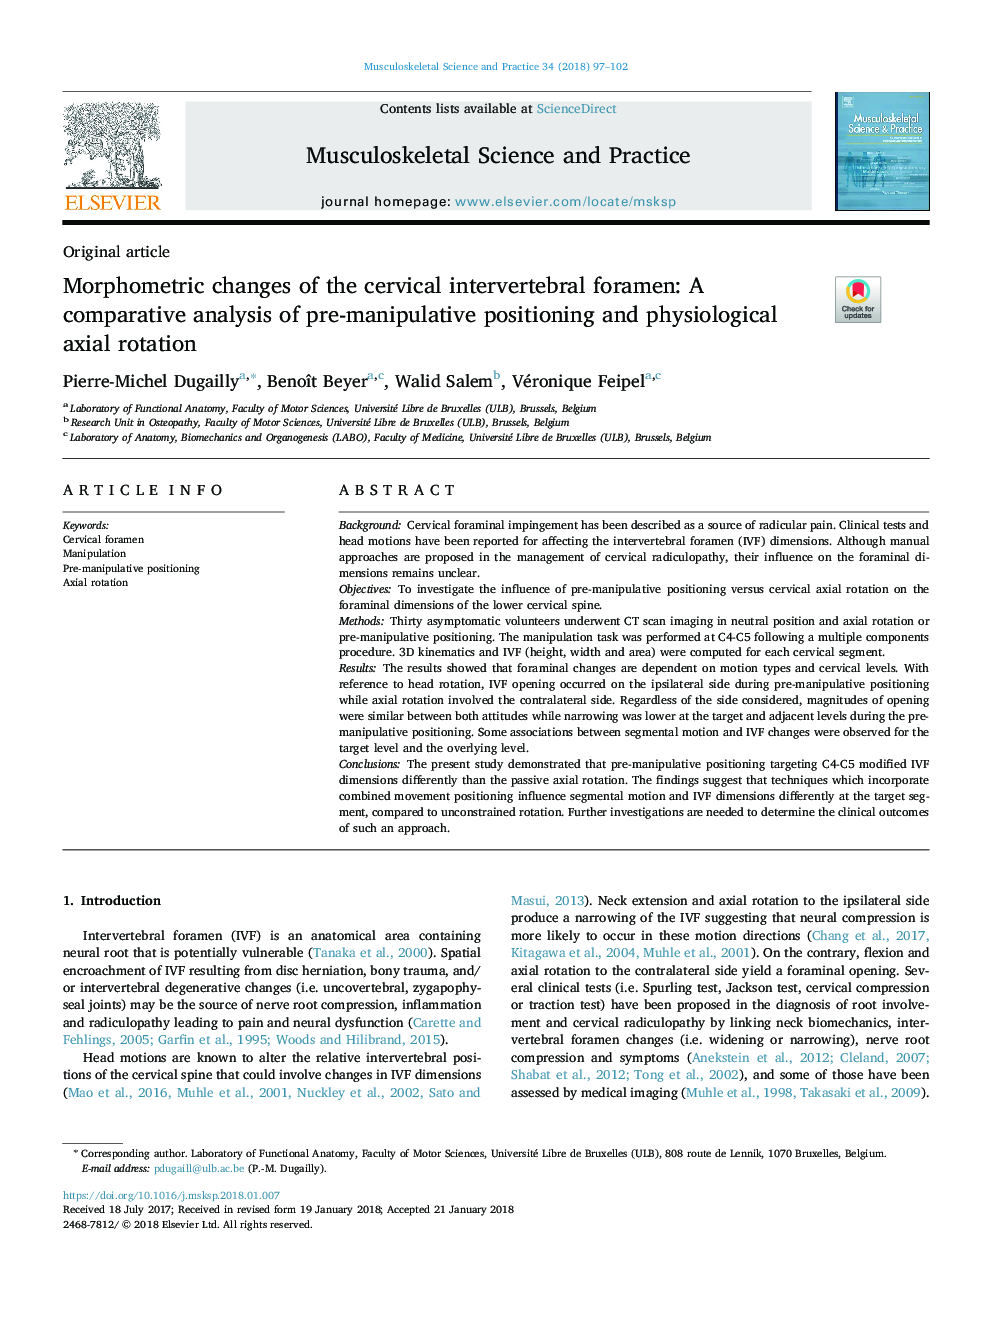 Morphometric changes of the cervical intervertebral foramen: A comparative analysis of pre-manipulative positioning and physiological axial rotation